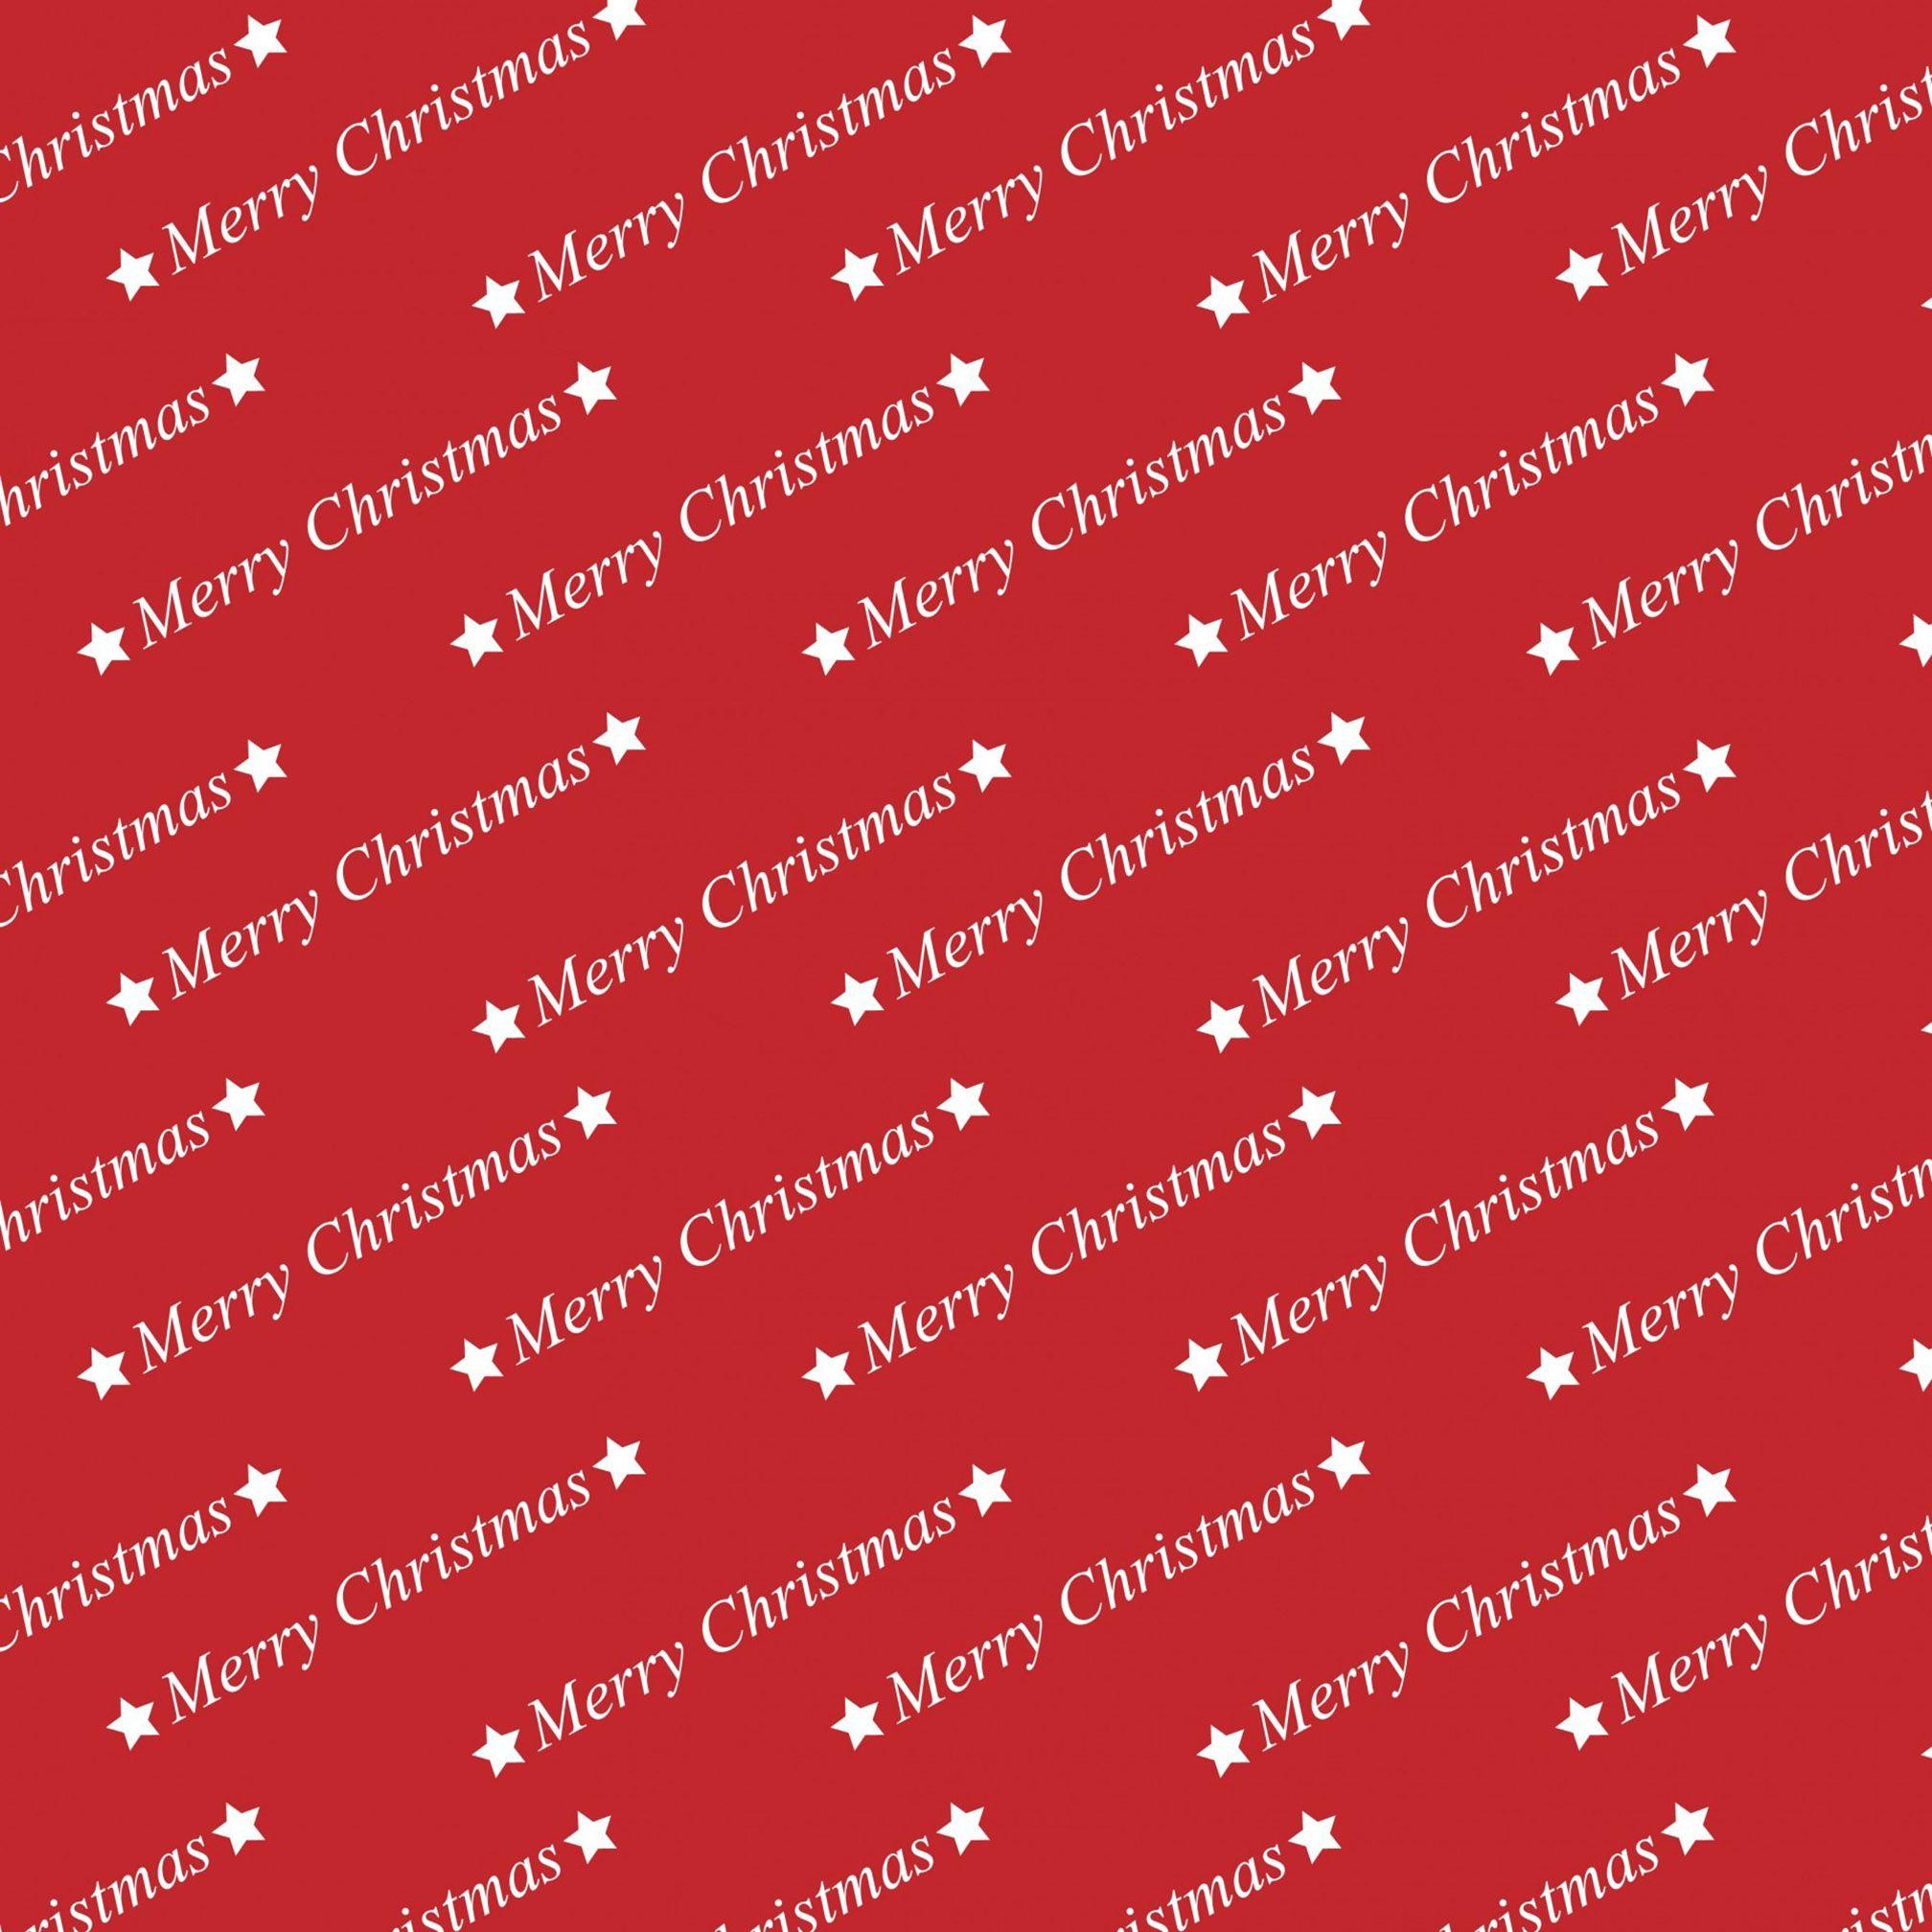 More Christmas Card, Wallpaper or Background Image